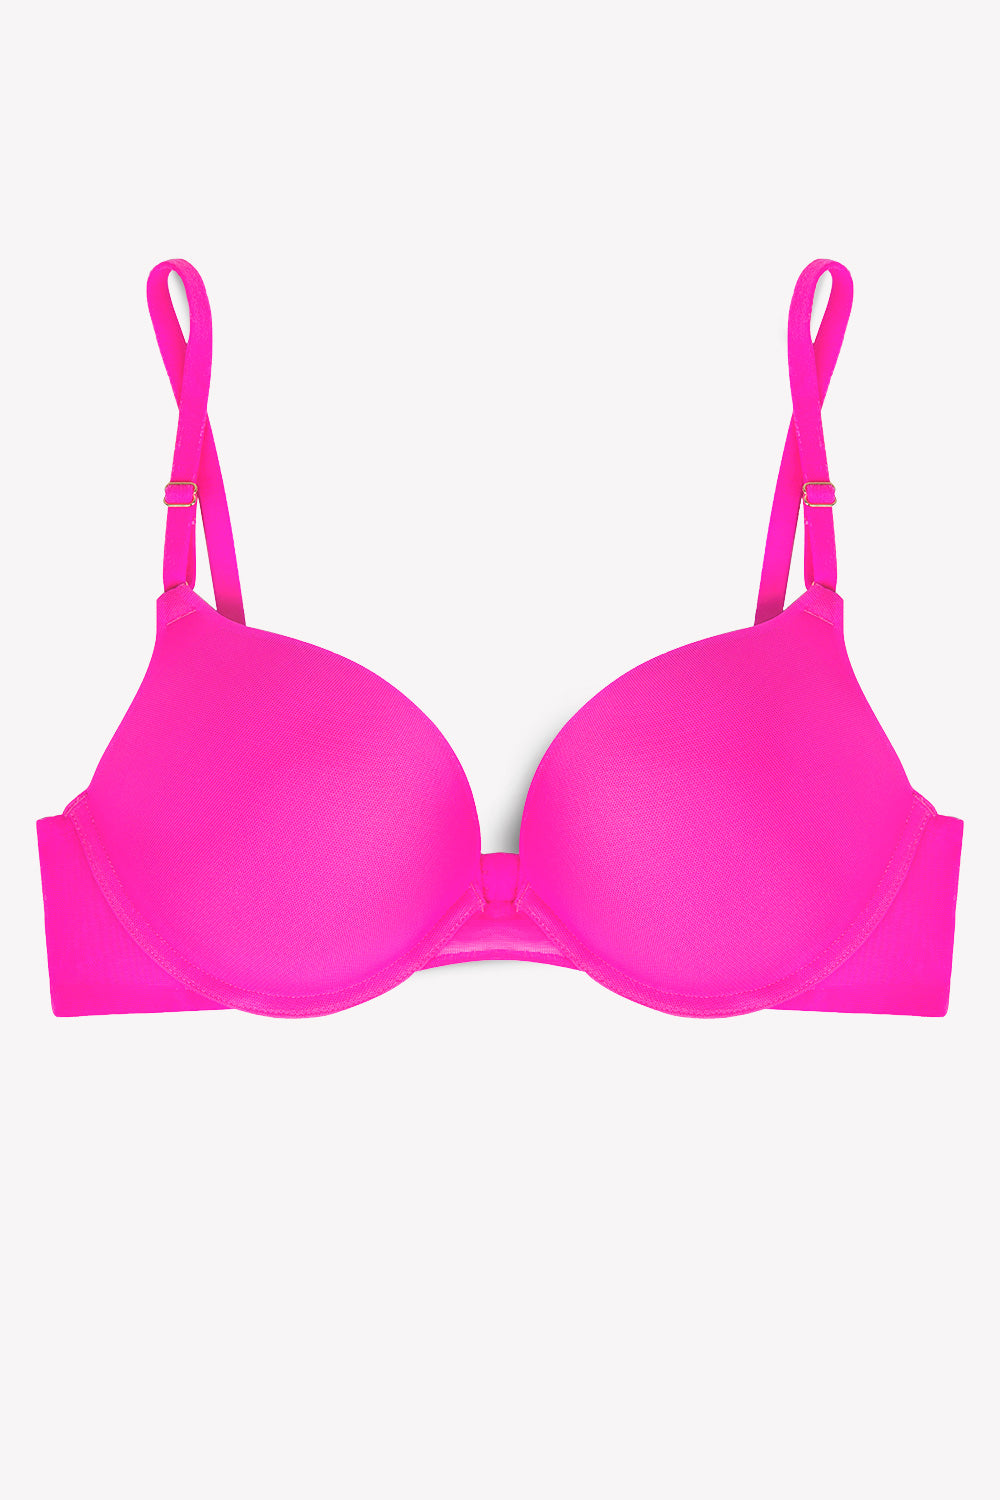 Xiushiren Thick Mold Cup Shaped Padded Bra Double Push Up